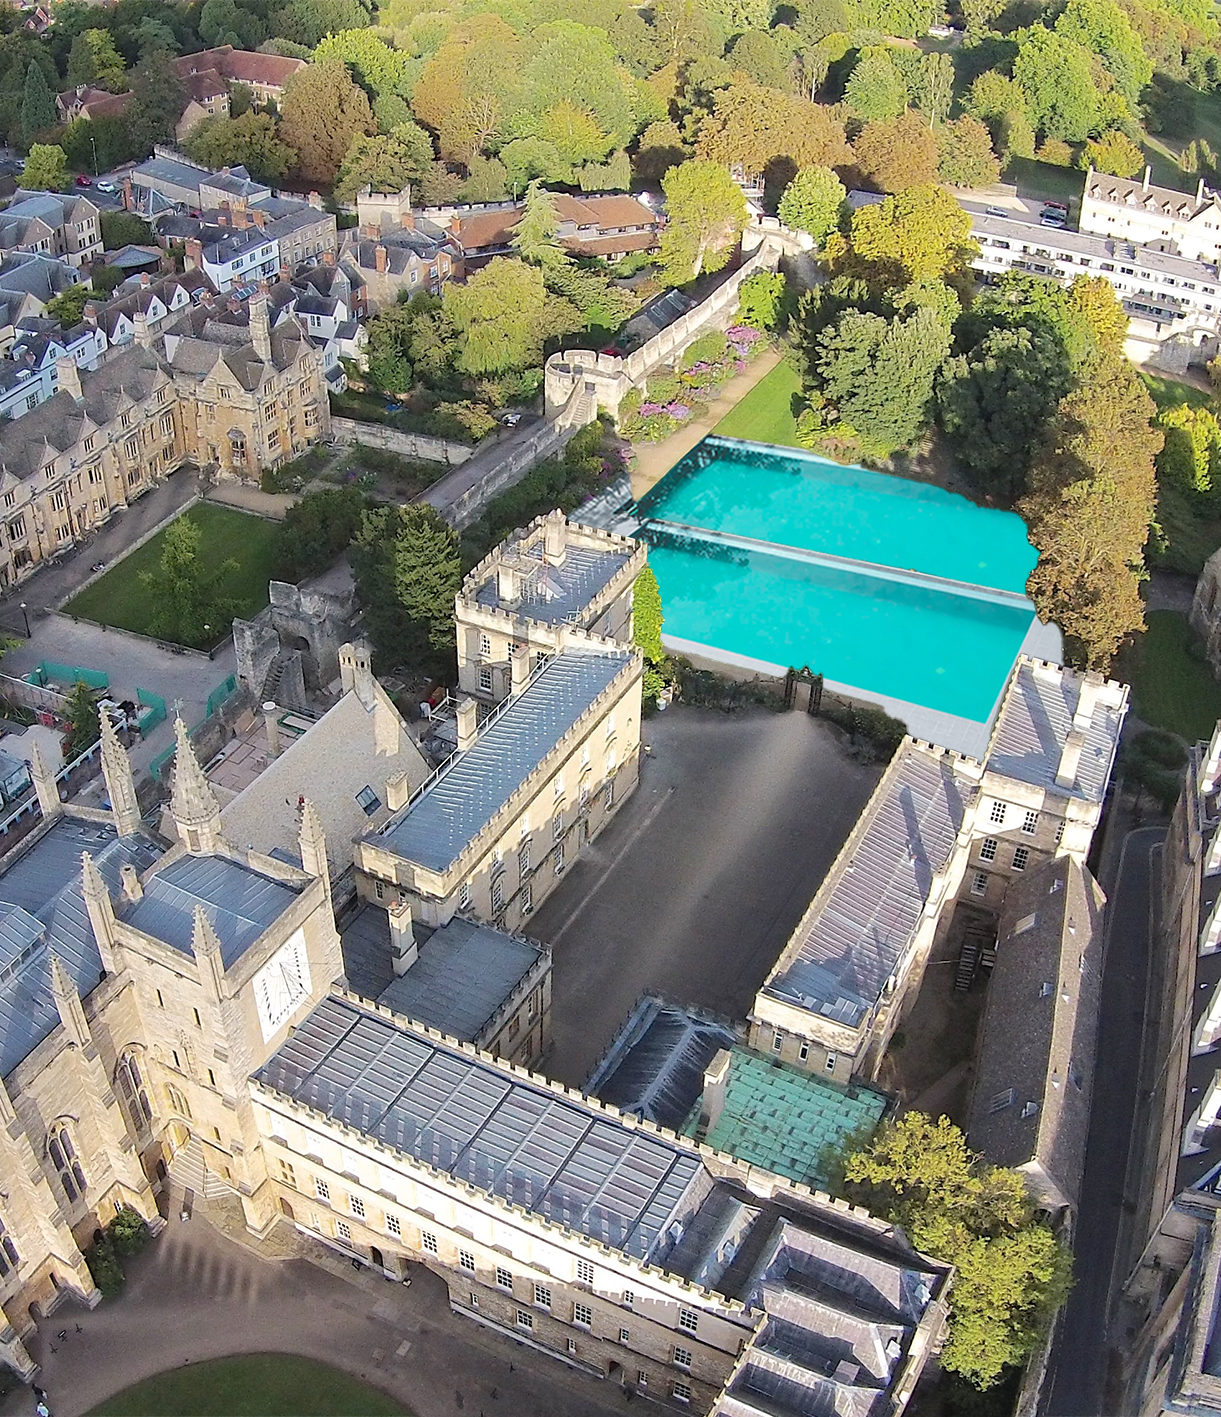 Artist mock-up of swimming pool replacing the lawn in Garden Quad in front of the Mound, with existing New College buildings surrounding it